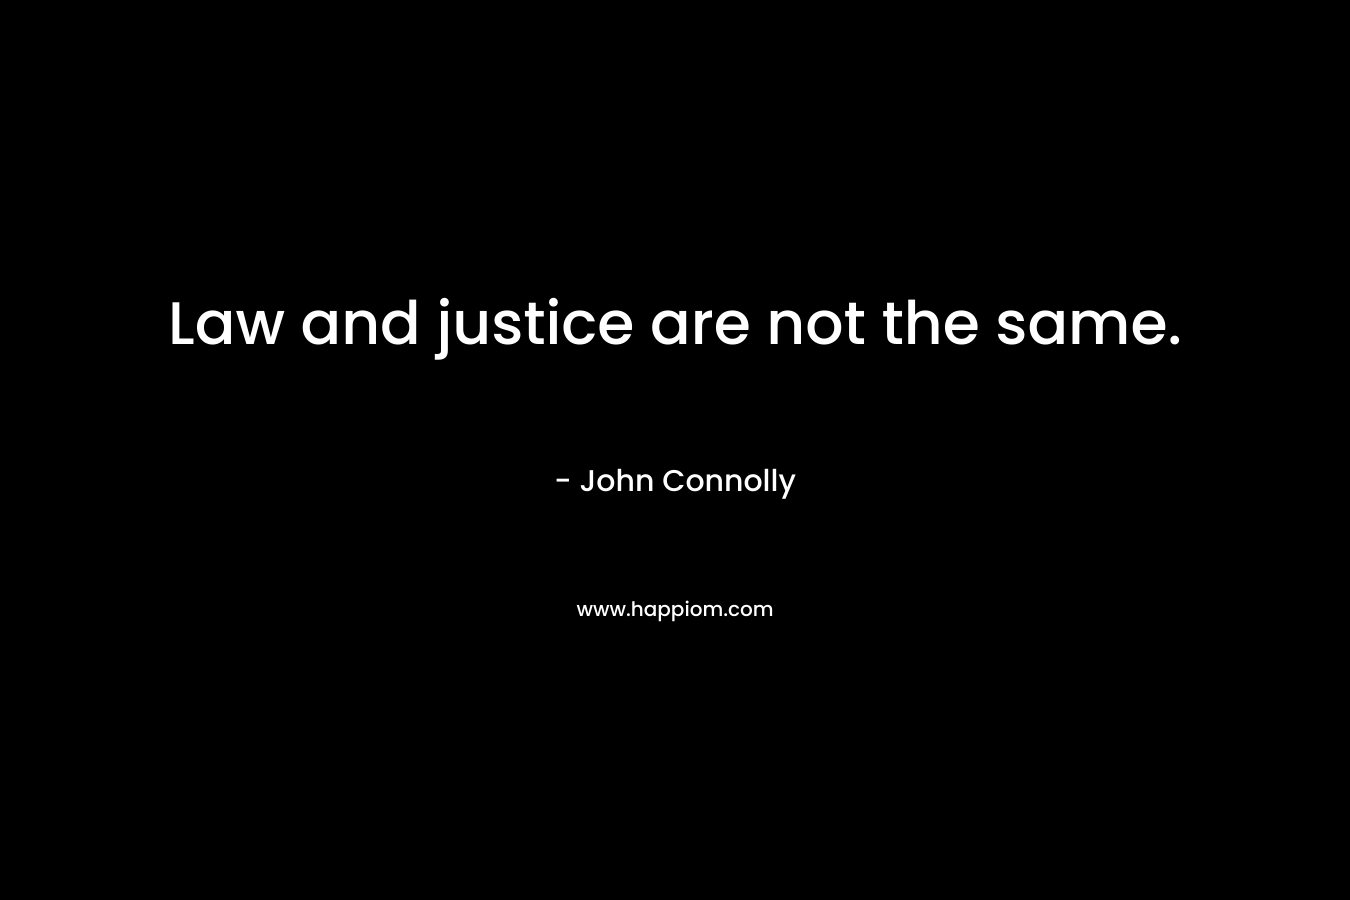 Law and justice are not the same. – John Connolly